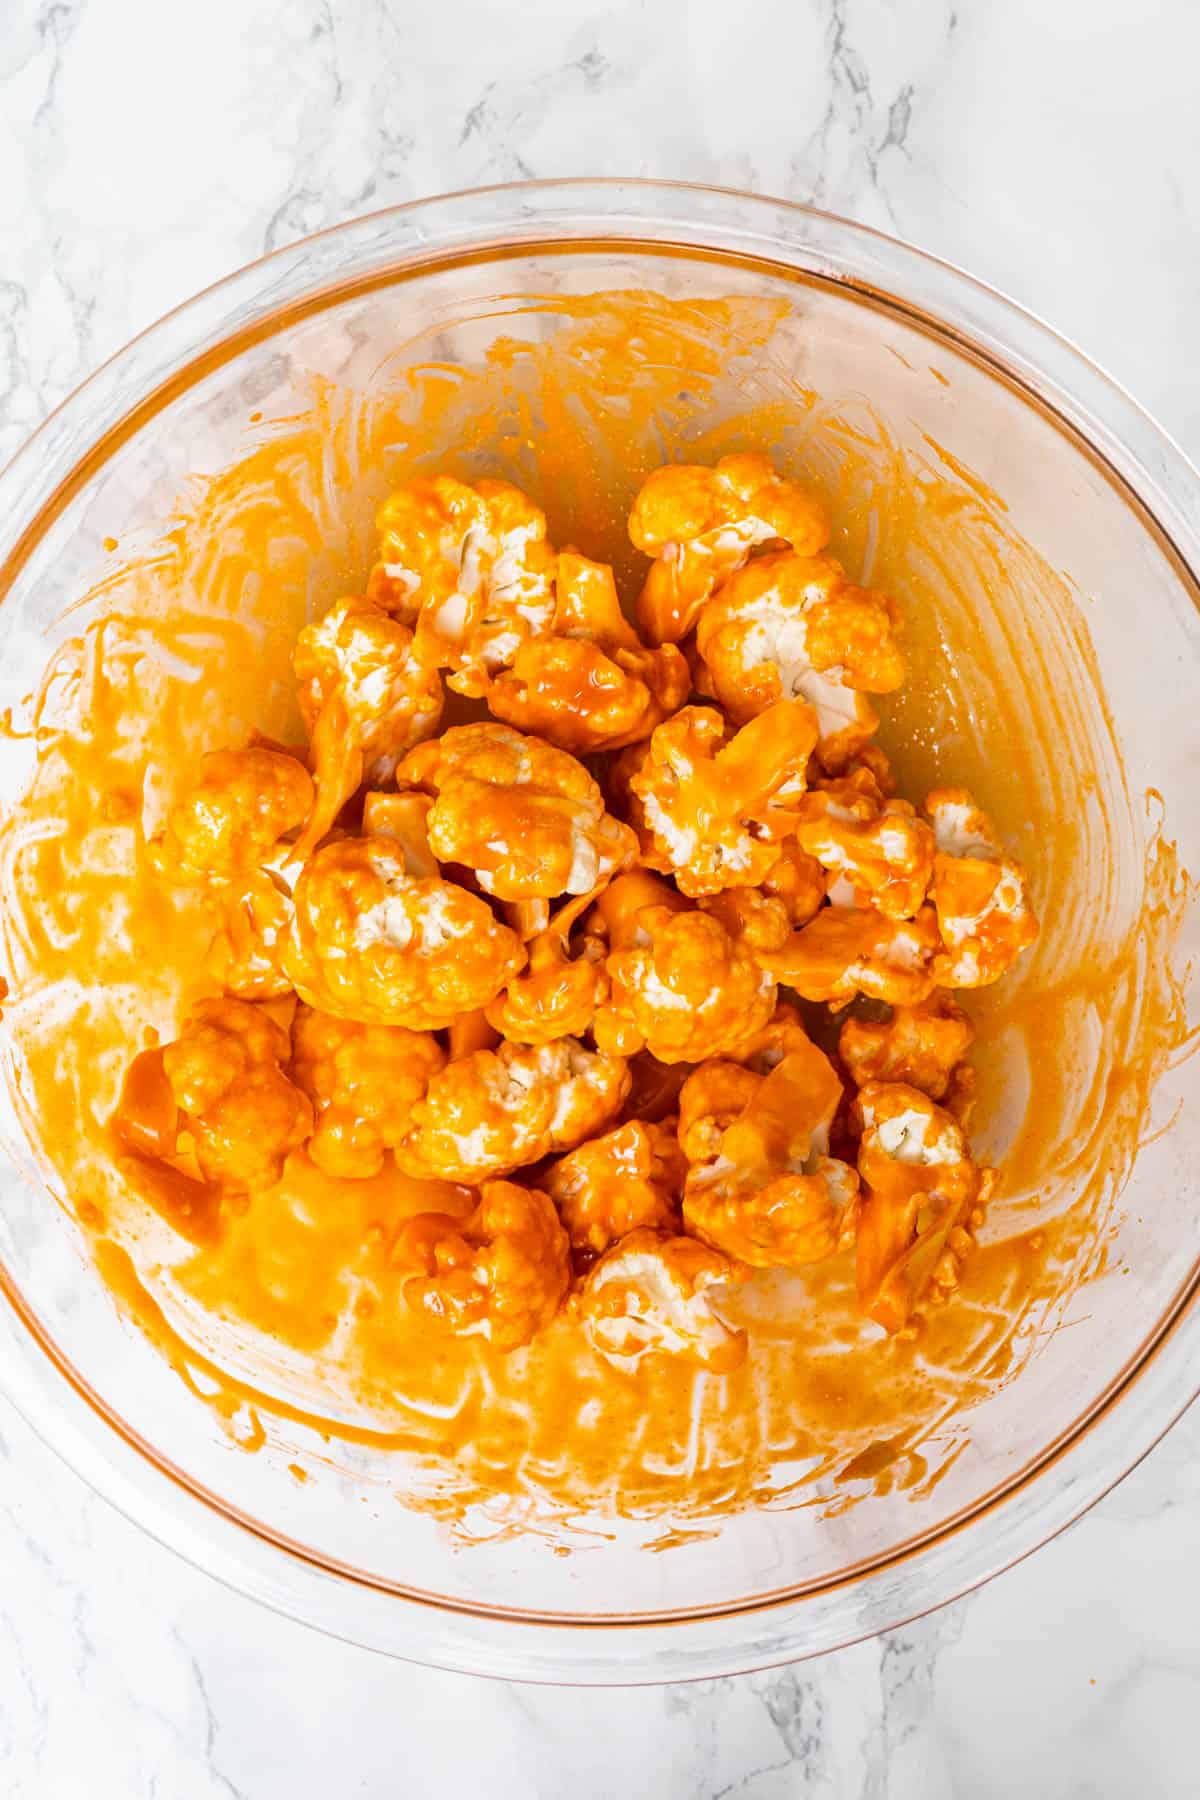 Large glass mixing bowl filled with raw cauliflower florets coated in Buffalo sauce